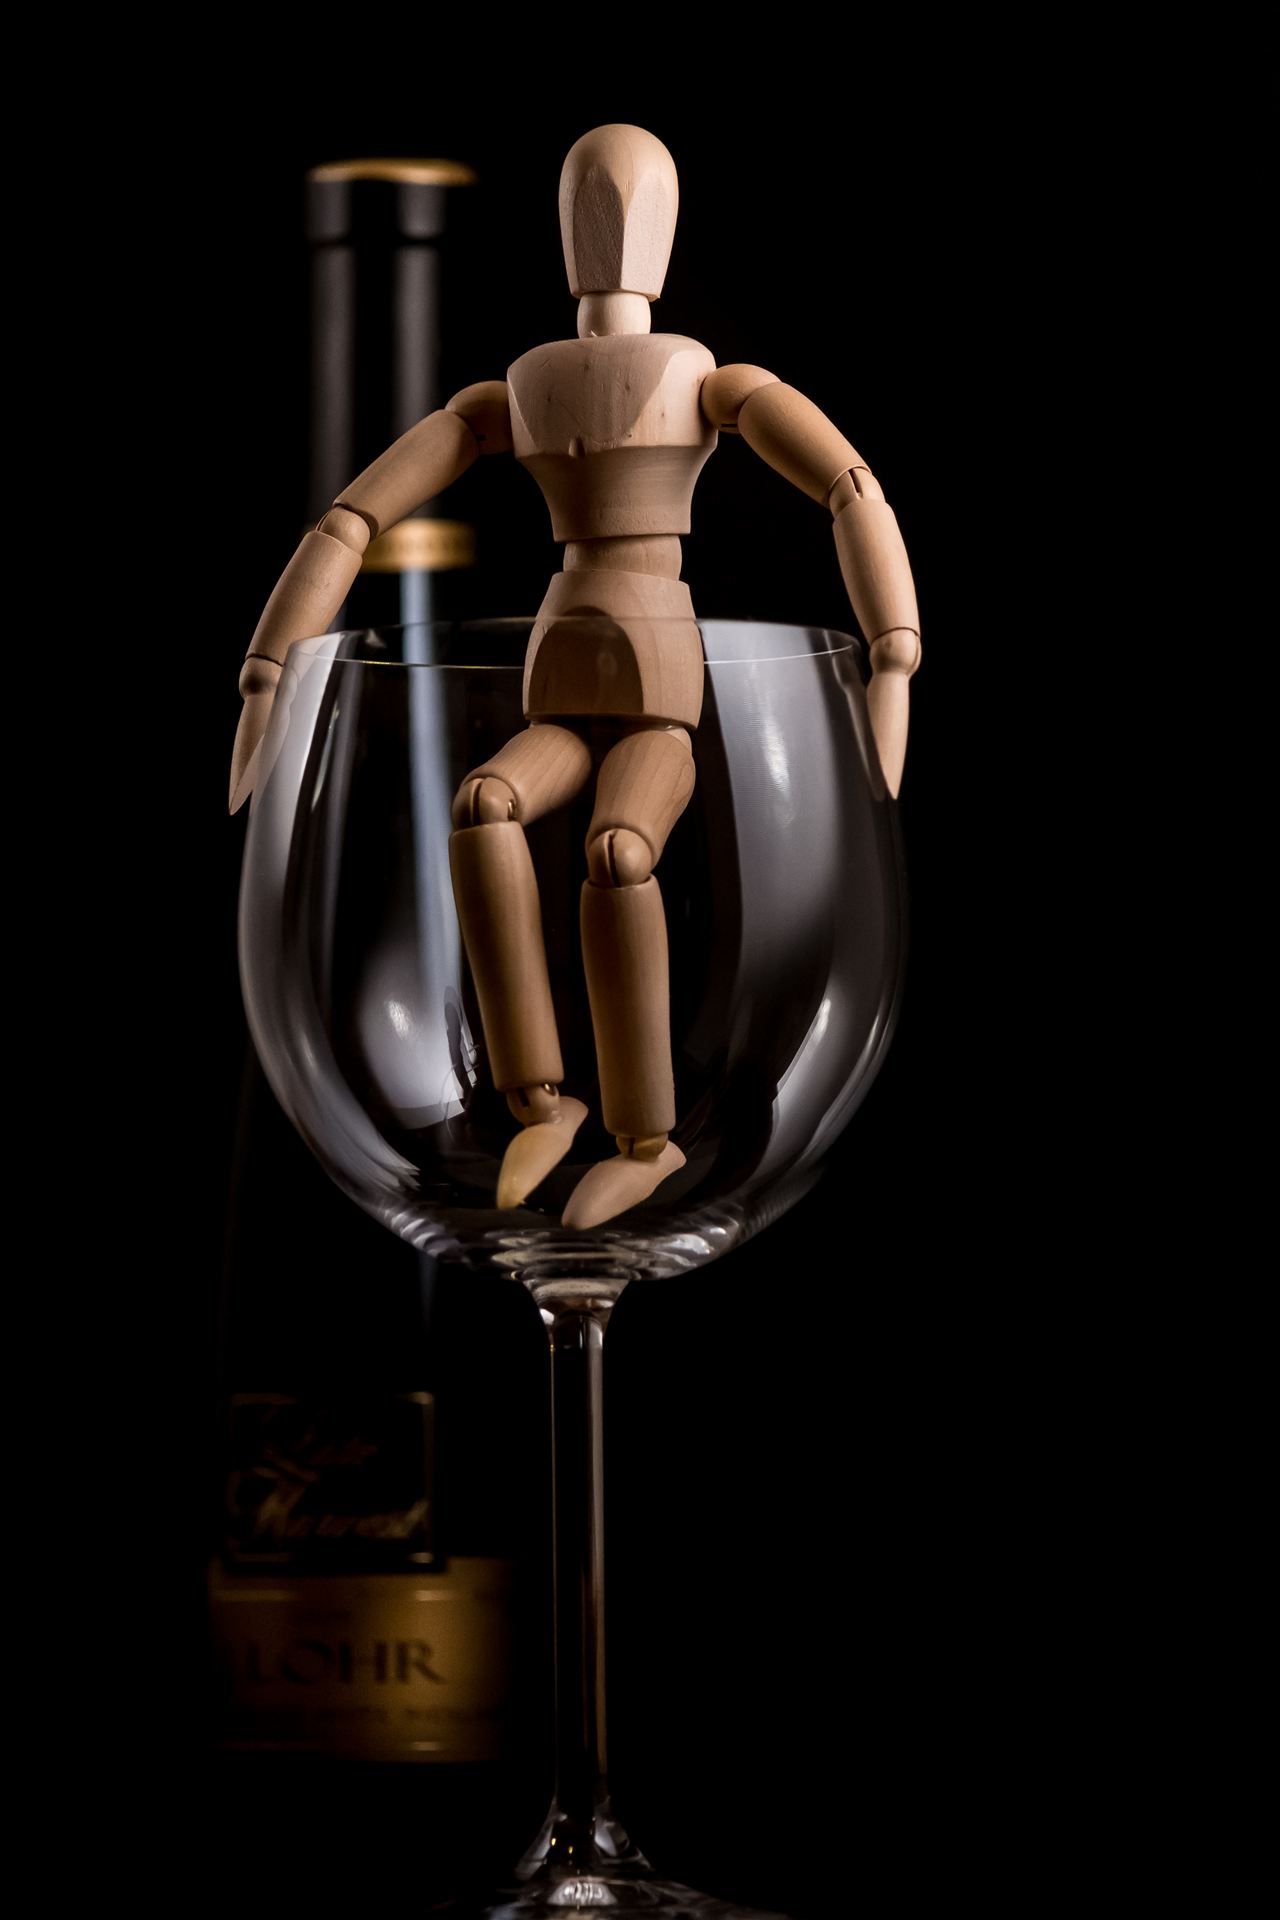 Artificial Oenophile.jpg - Artie contemplates a good glass of wine by Sarah Williams